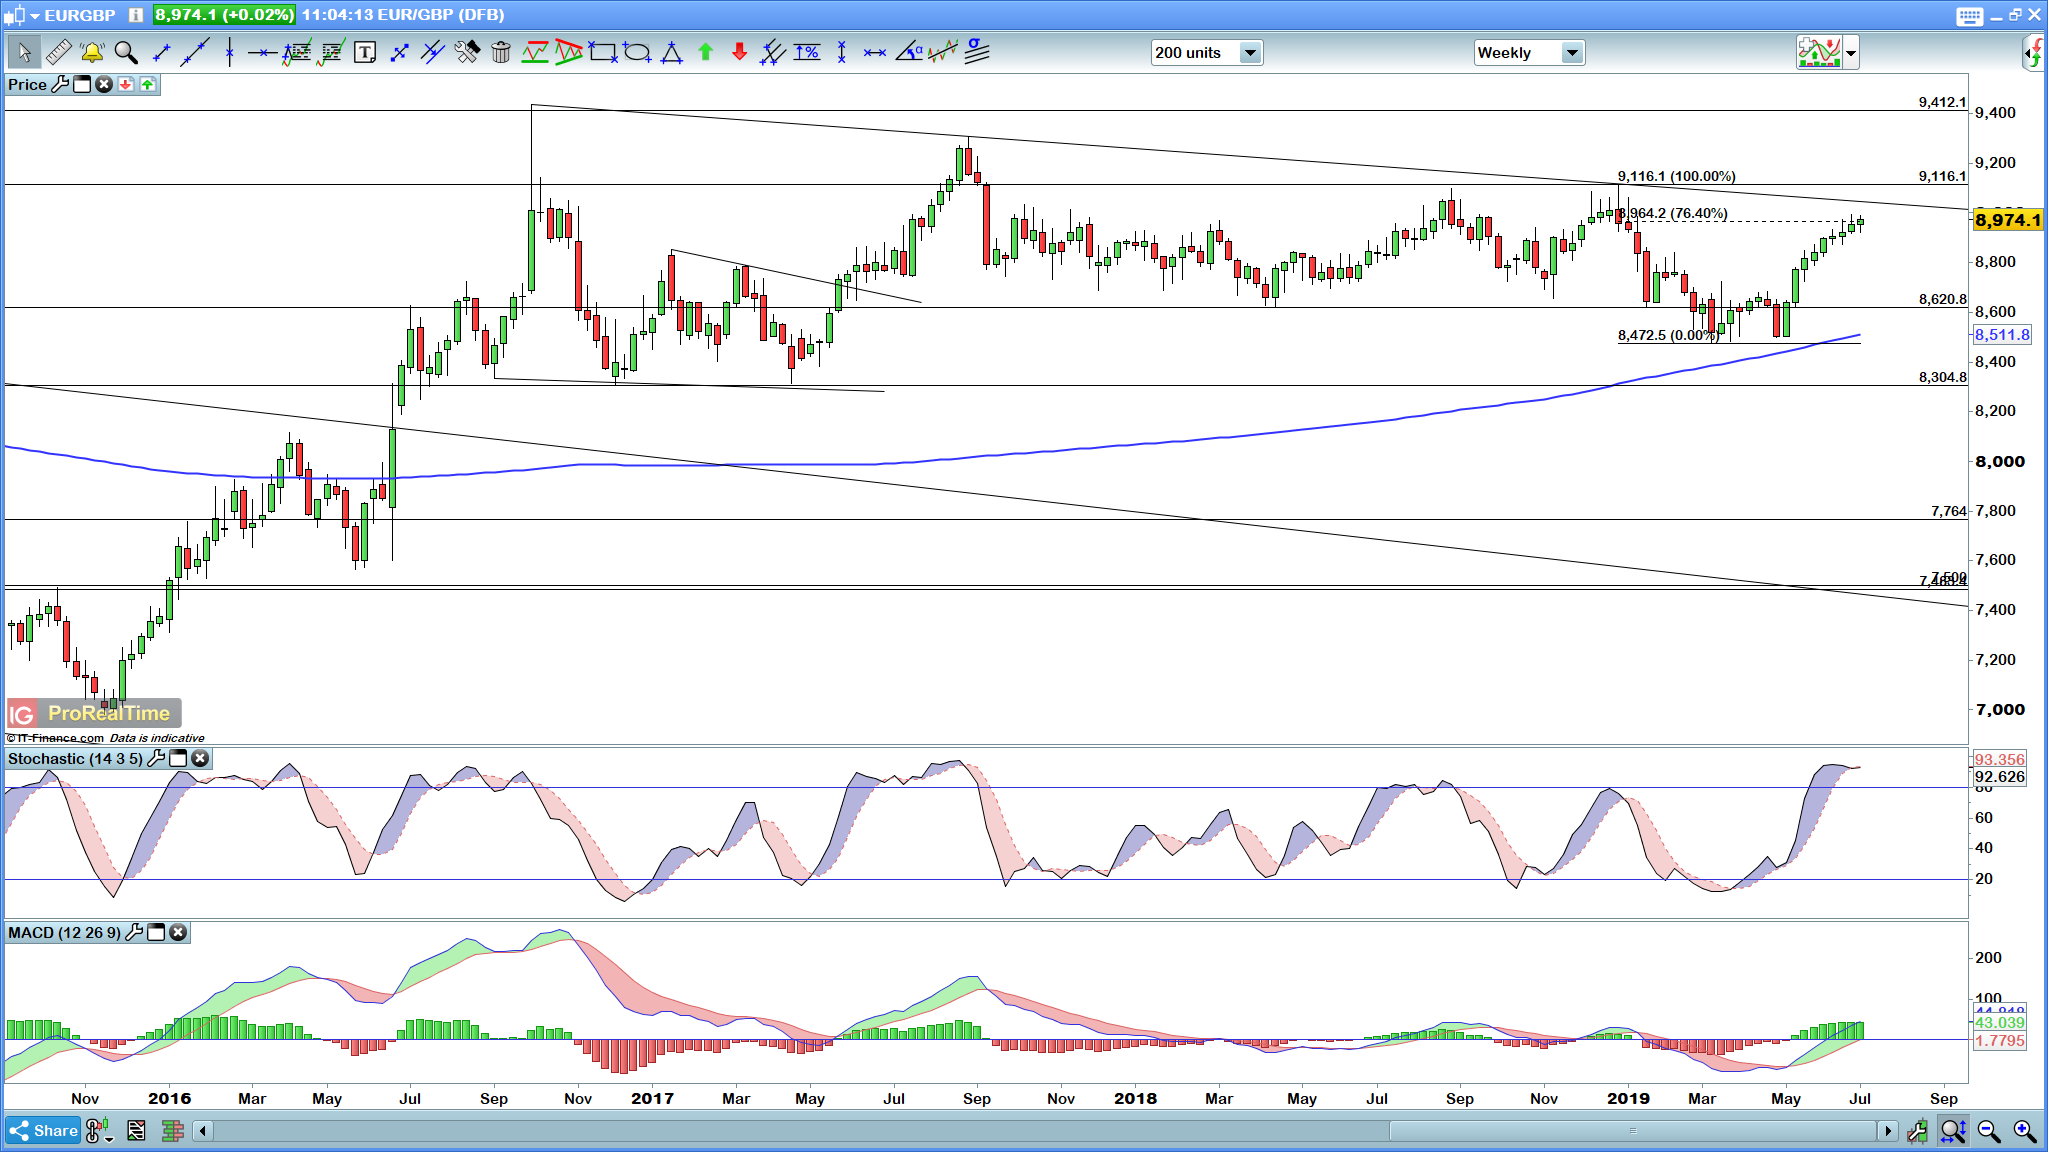 EUR/GBP weekly chart